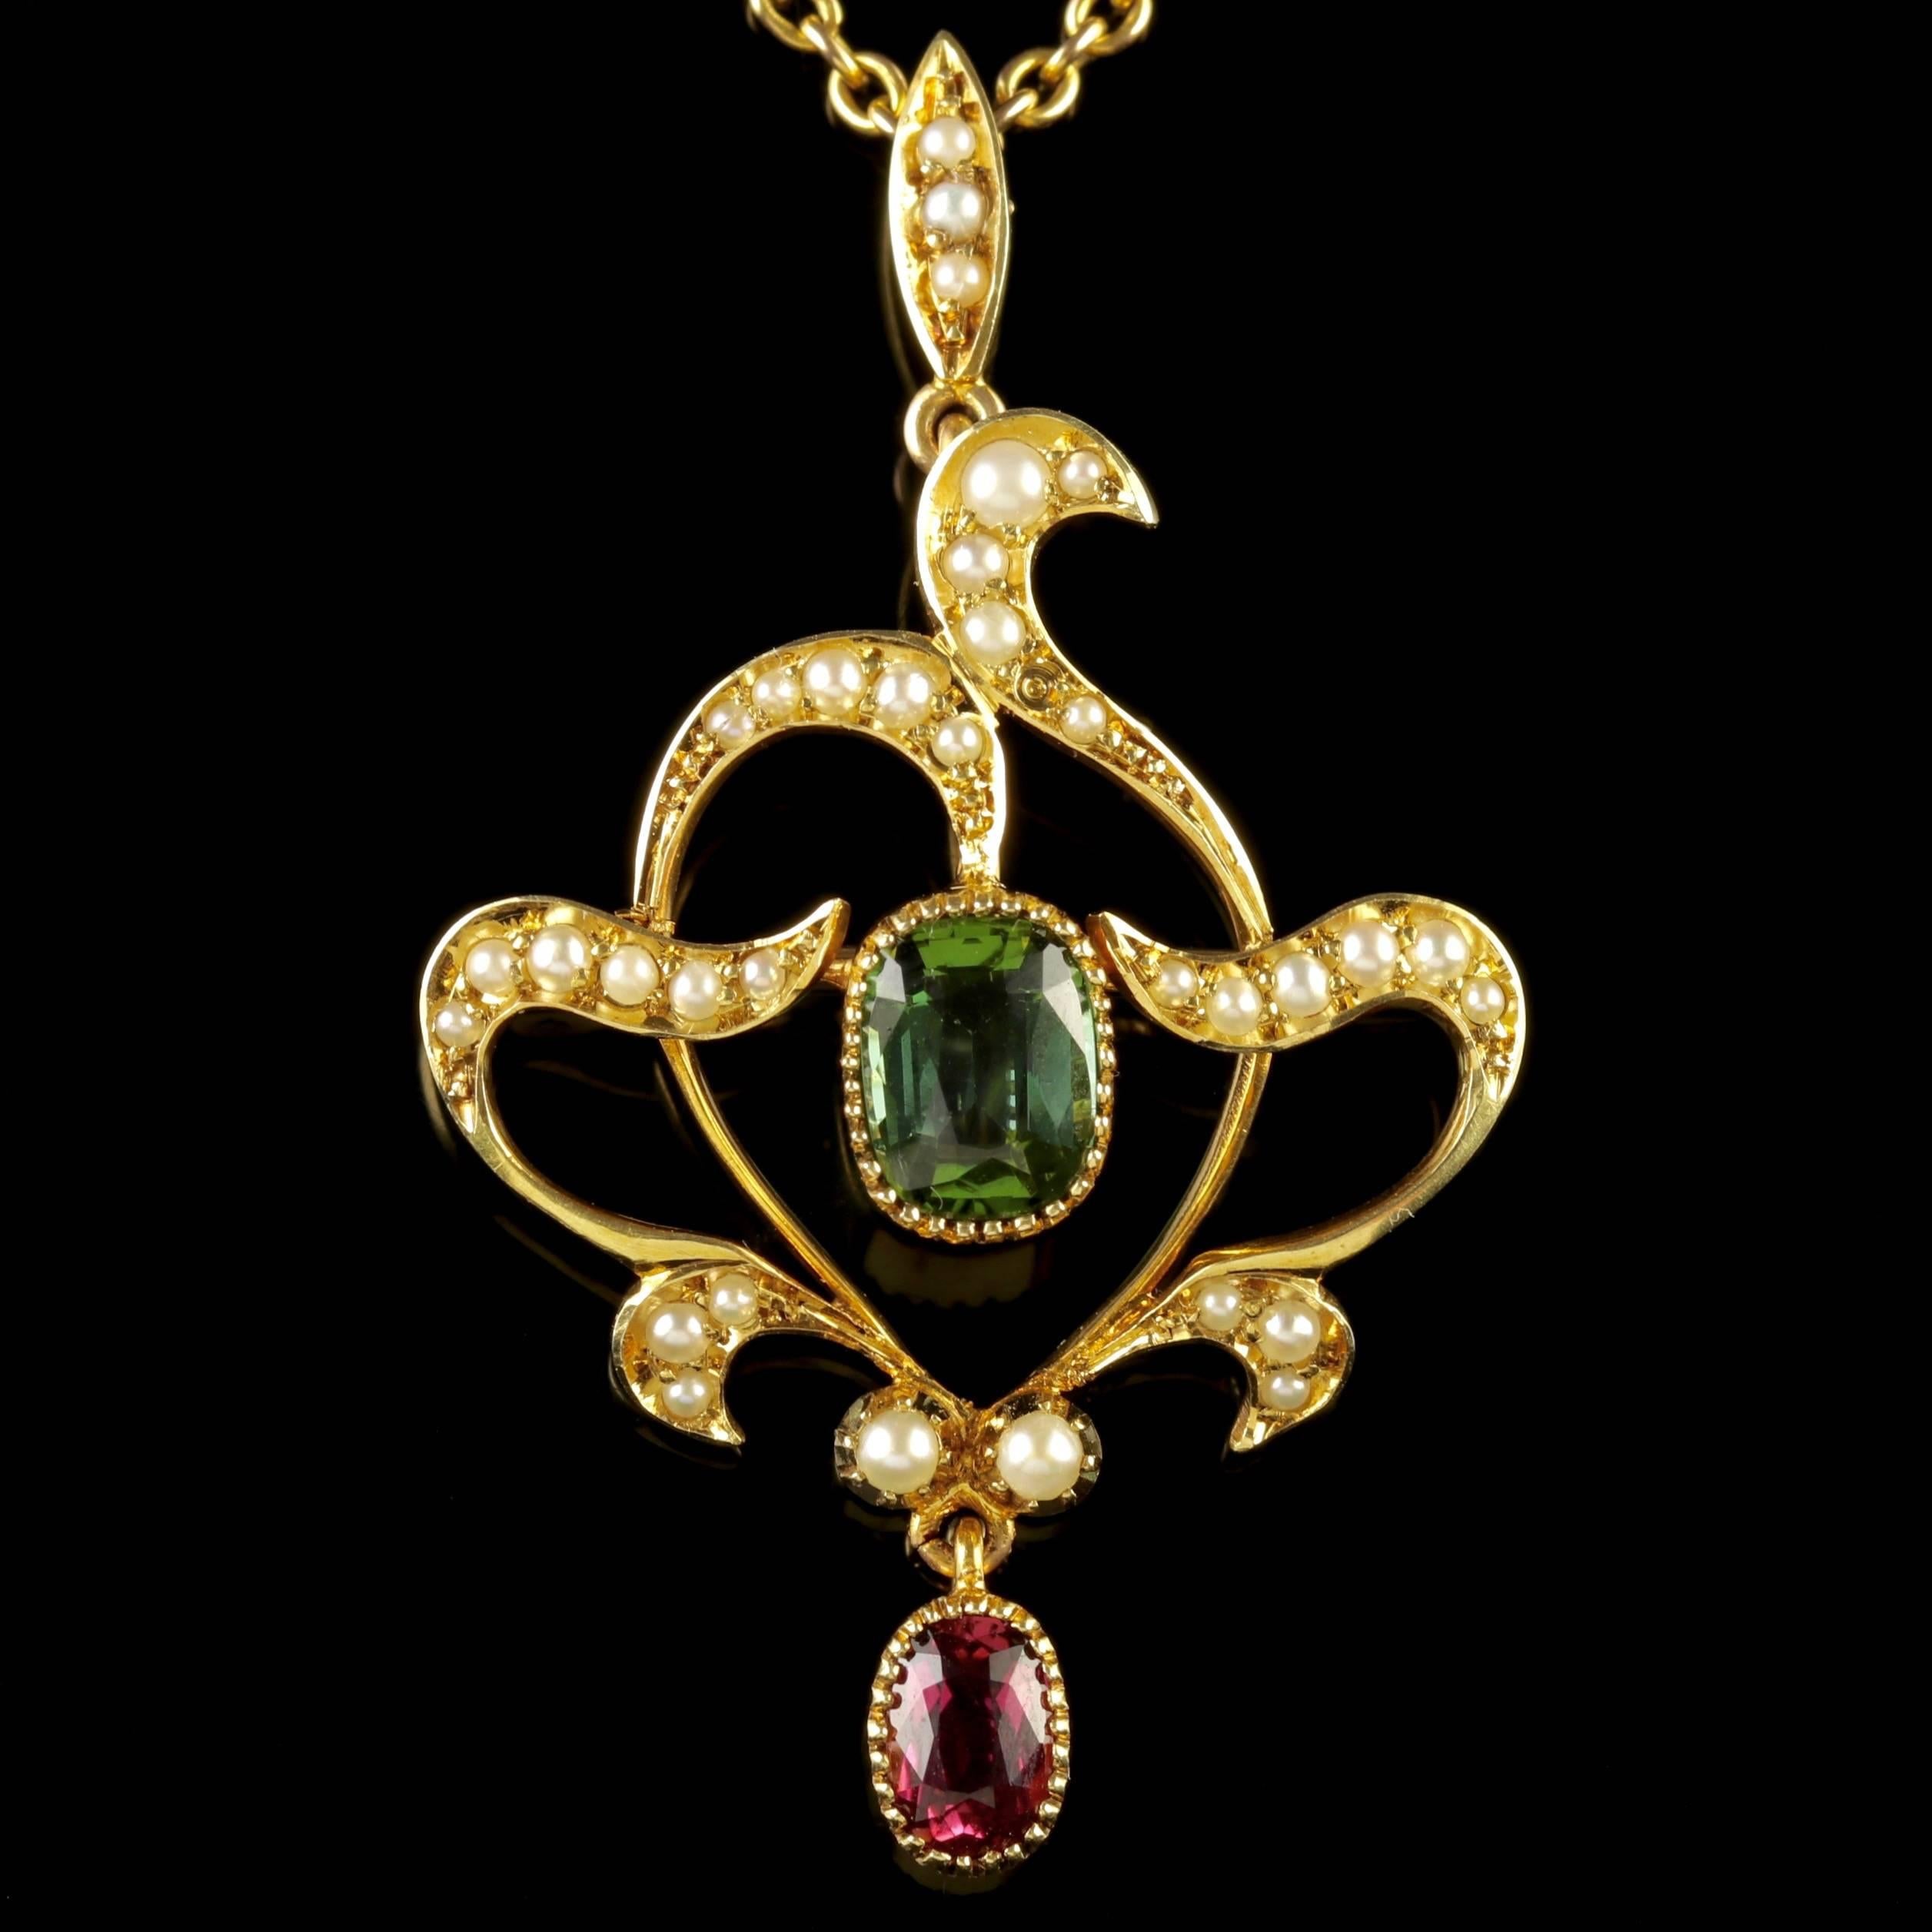 To read more please click continue reading below-

This fabulous antique 15ct Yellow Gold Victorian Suffragette pendant and chain is Circa 1900.

Suffragettes liked to be depicted as feminine, their jewellery was chosen to counter the stereotypes